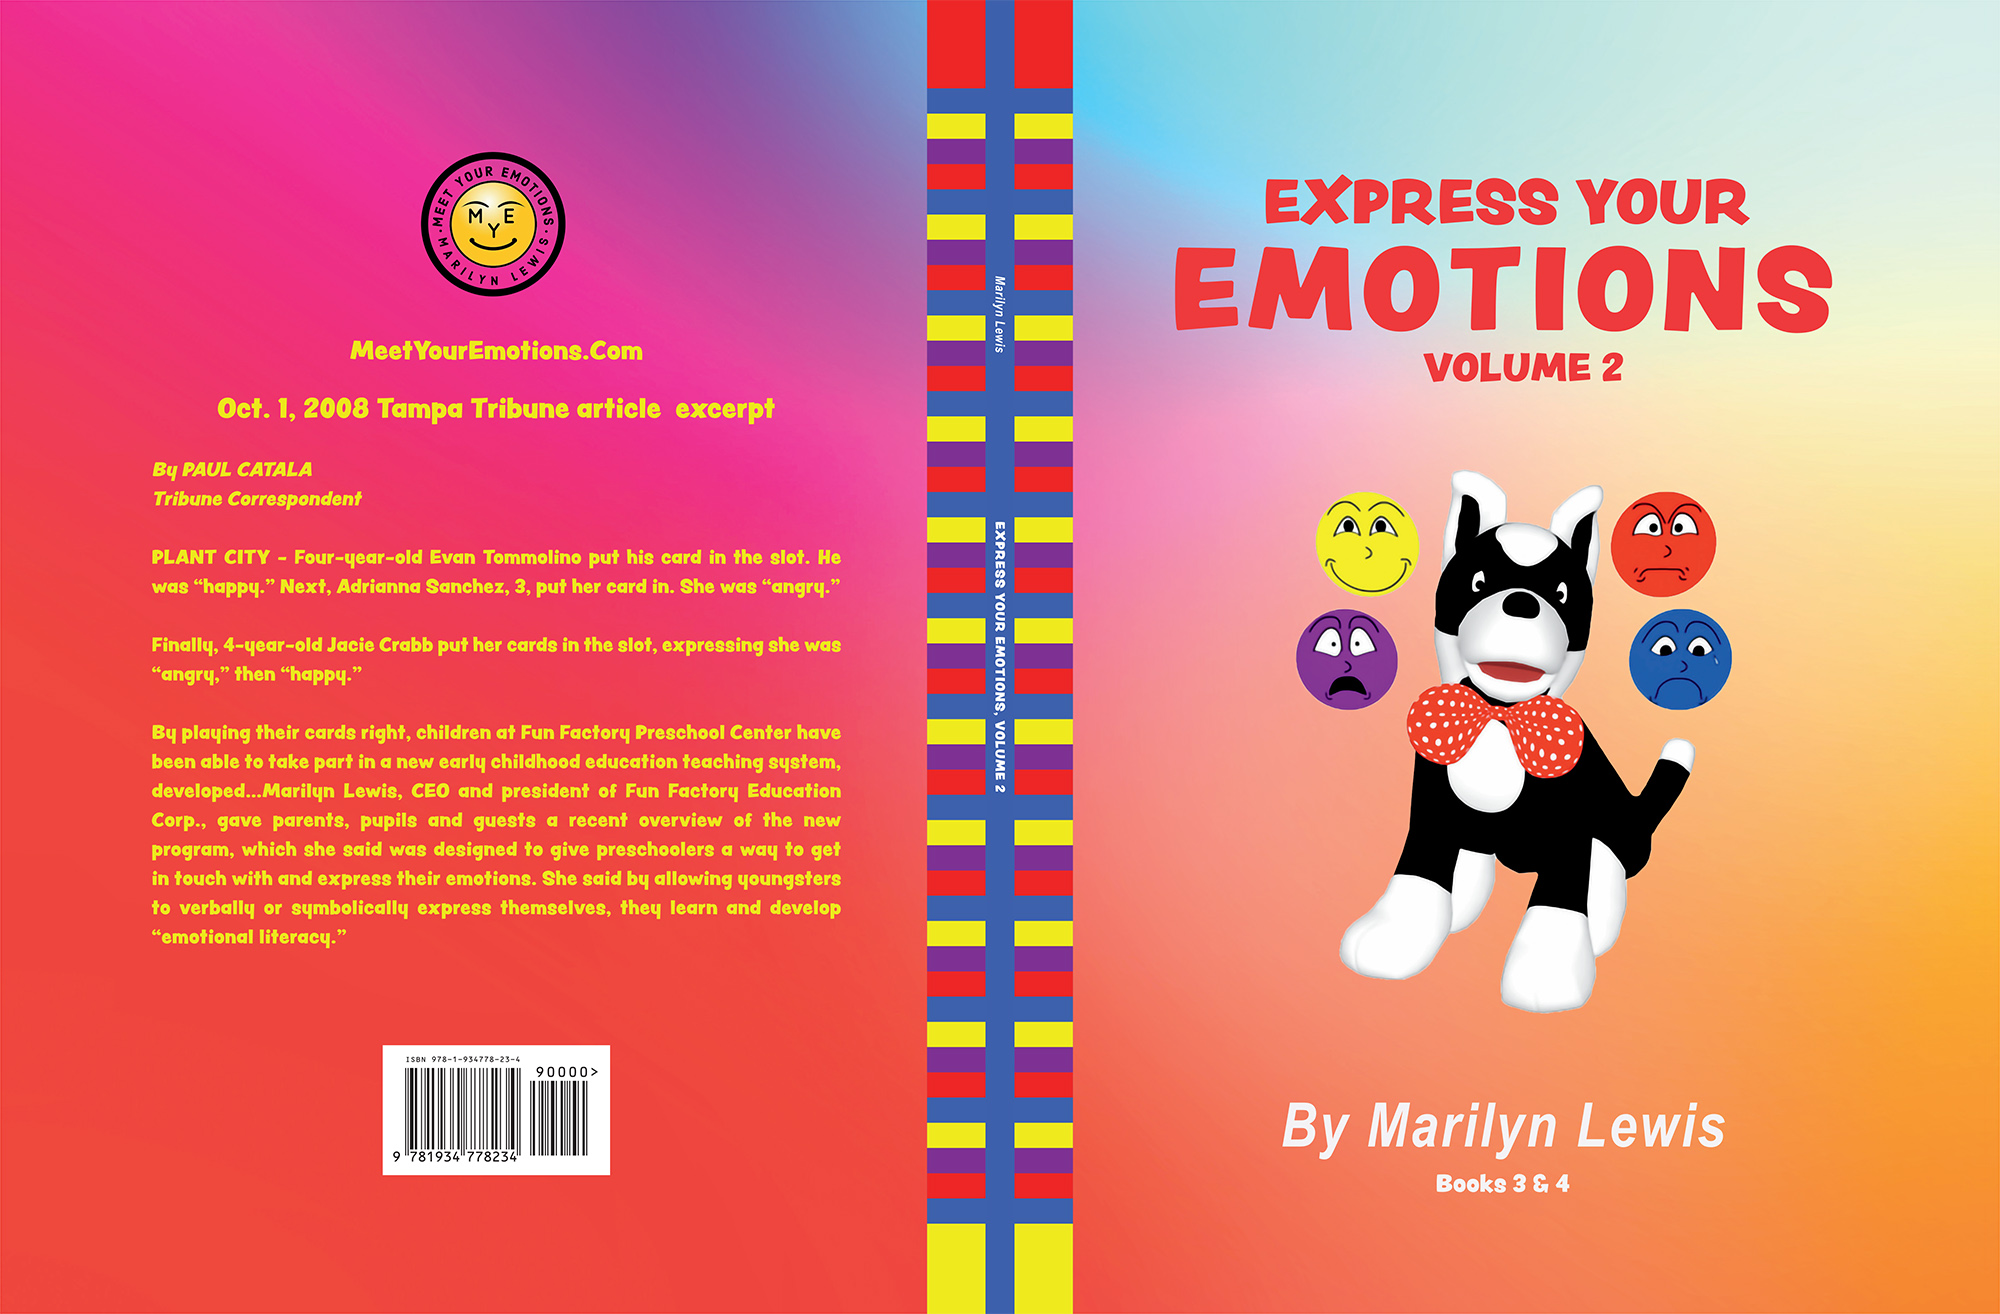 Express Your Emotions Vol 2